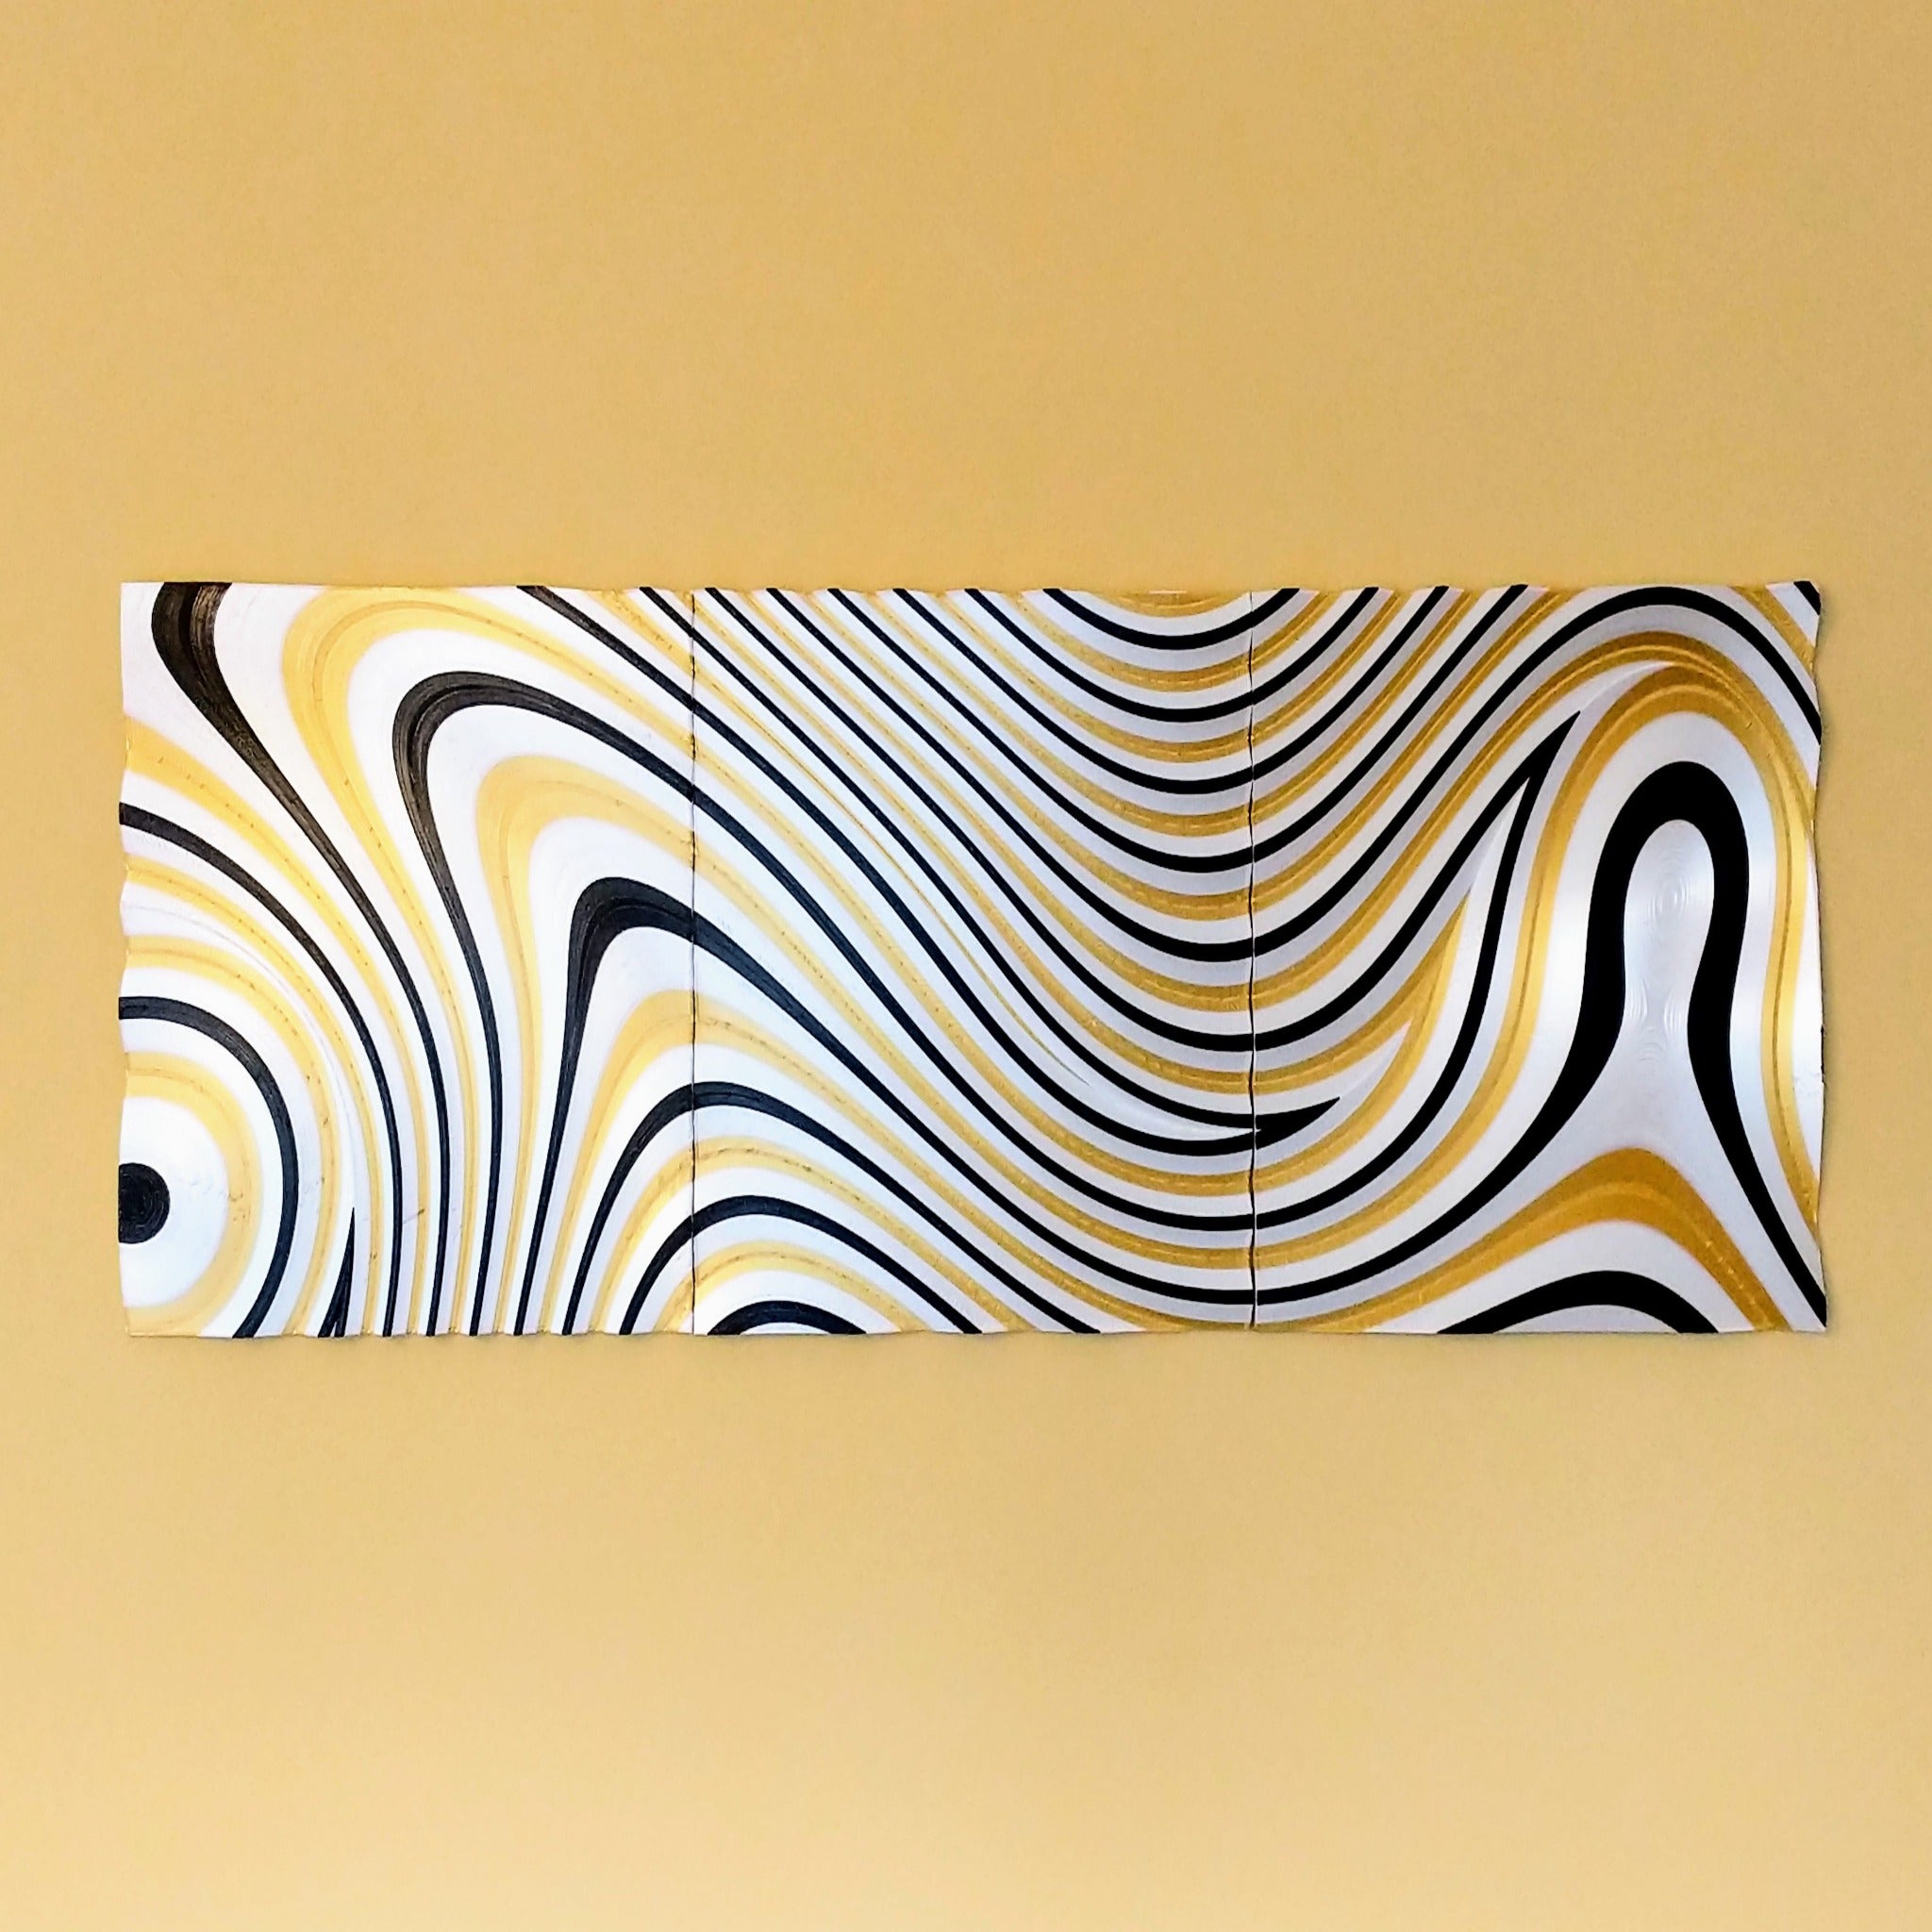 3D printed 3 panel wall art designed by local NJ artist 